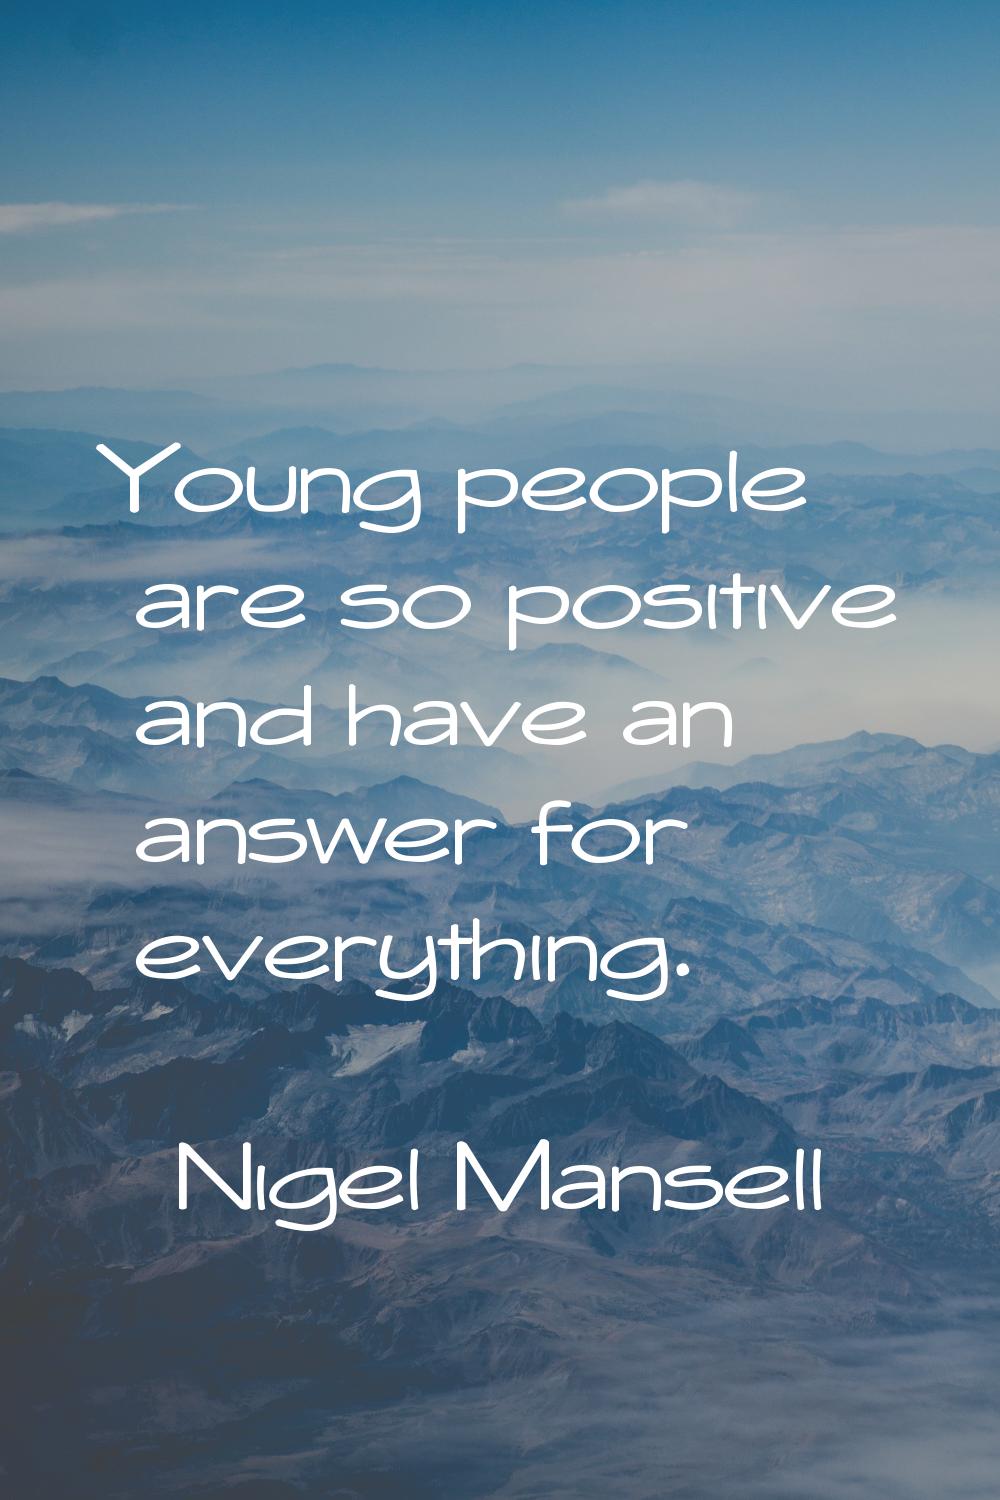 Young people are so positive and have an answer for everything.